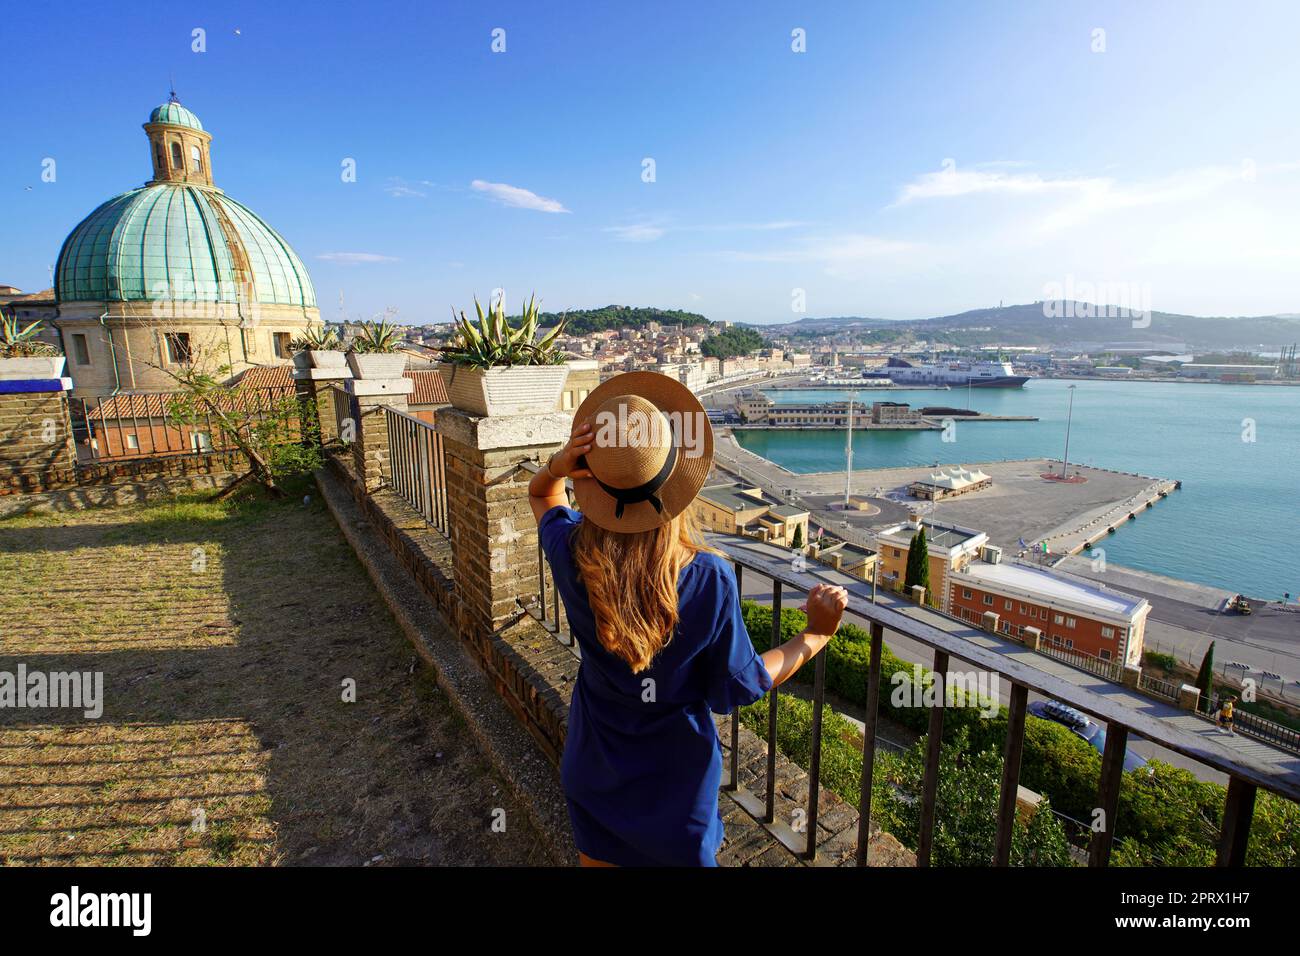 Tourism in Ancona, Italy. Back view of traveler woman enjoying view of Ancona city and seaport from terrace, Marche, Italy. Stock Photo